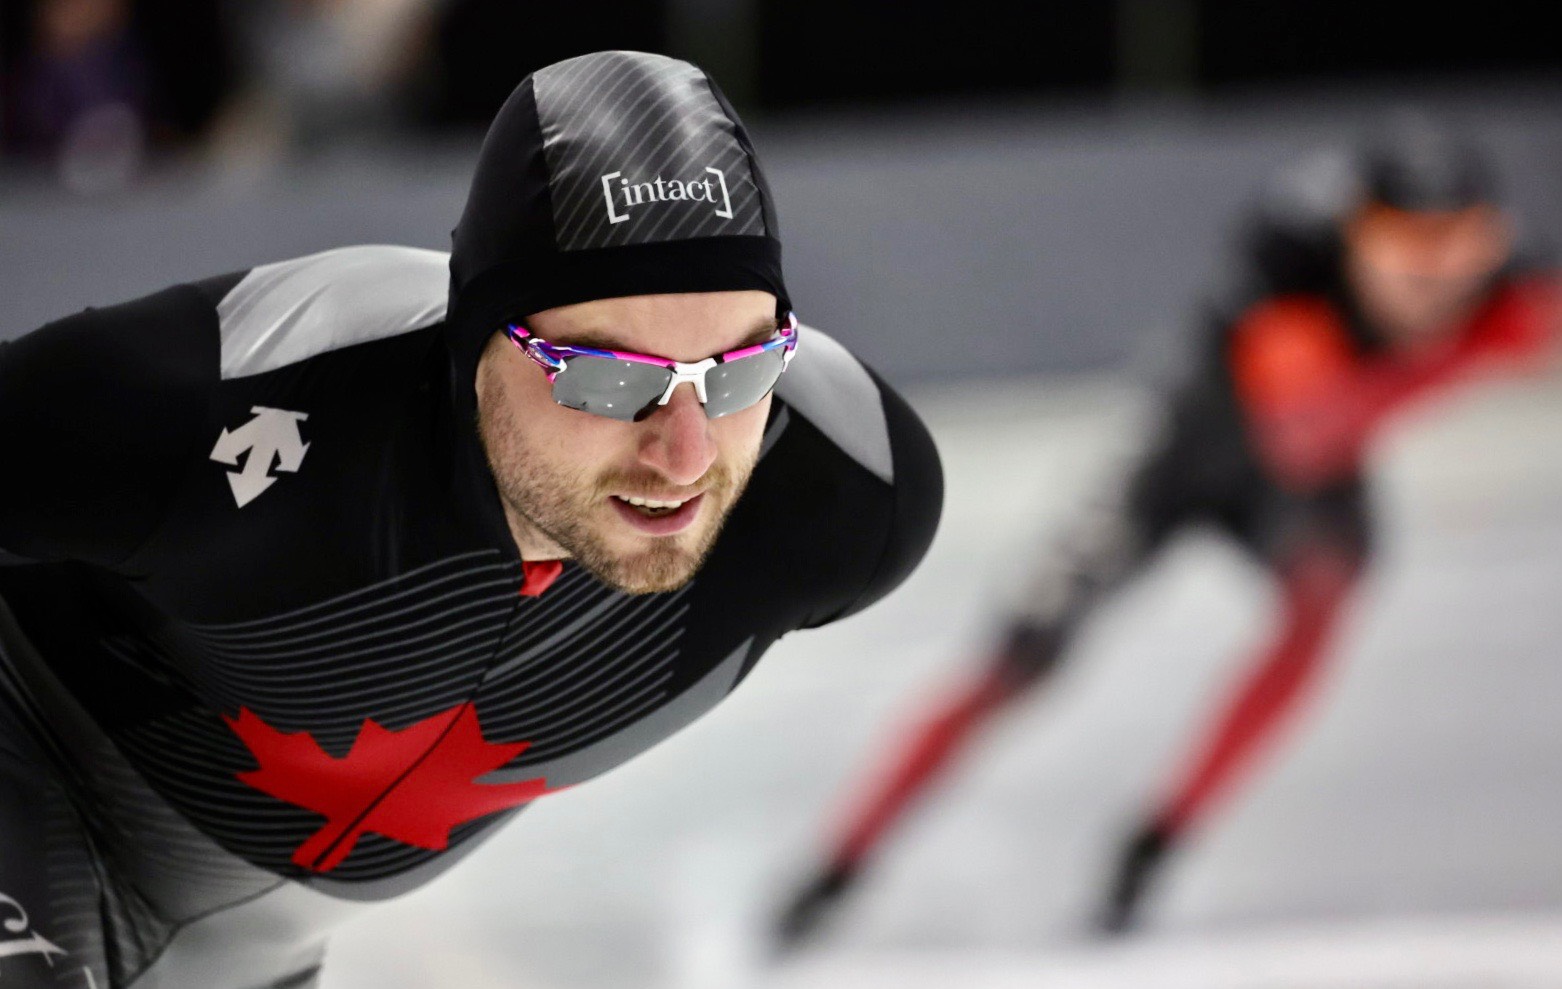 Laurent Dubreuil wins 500m national title on home ice in Quebec City